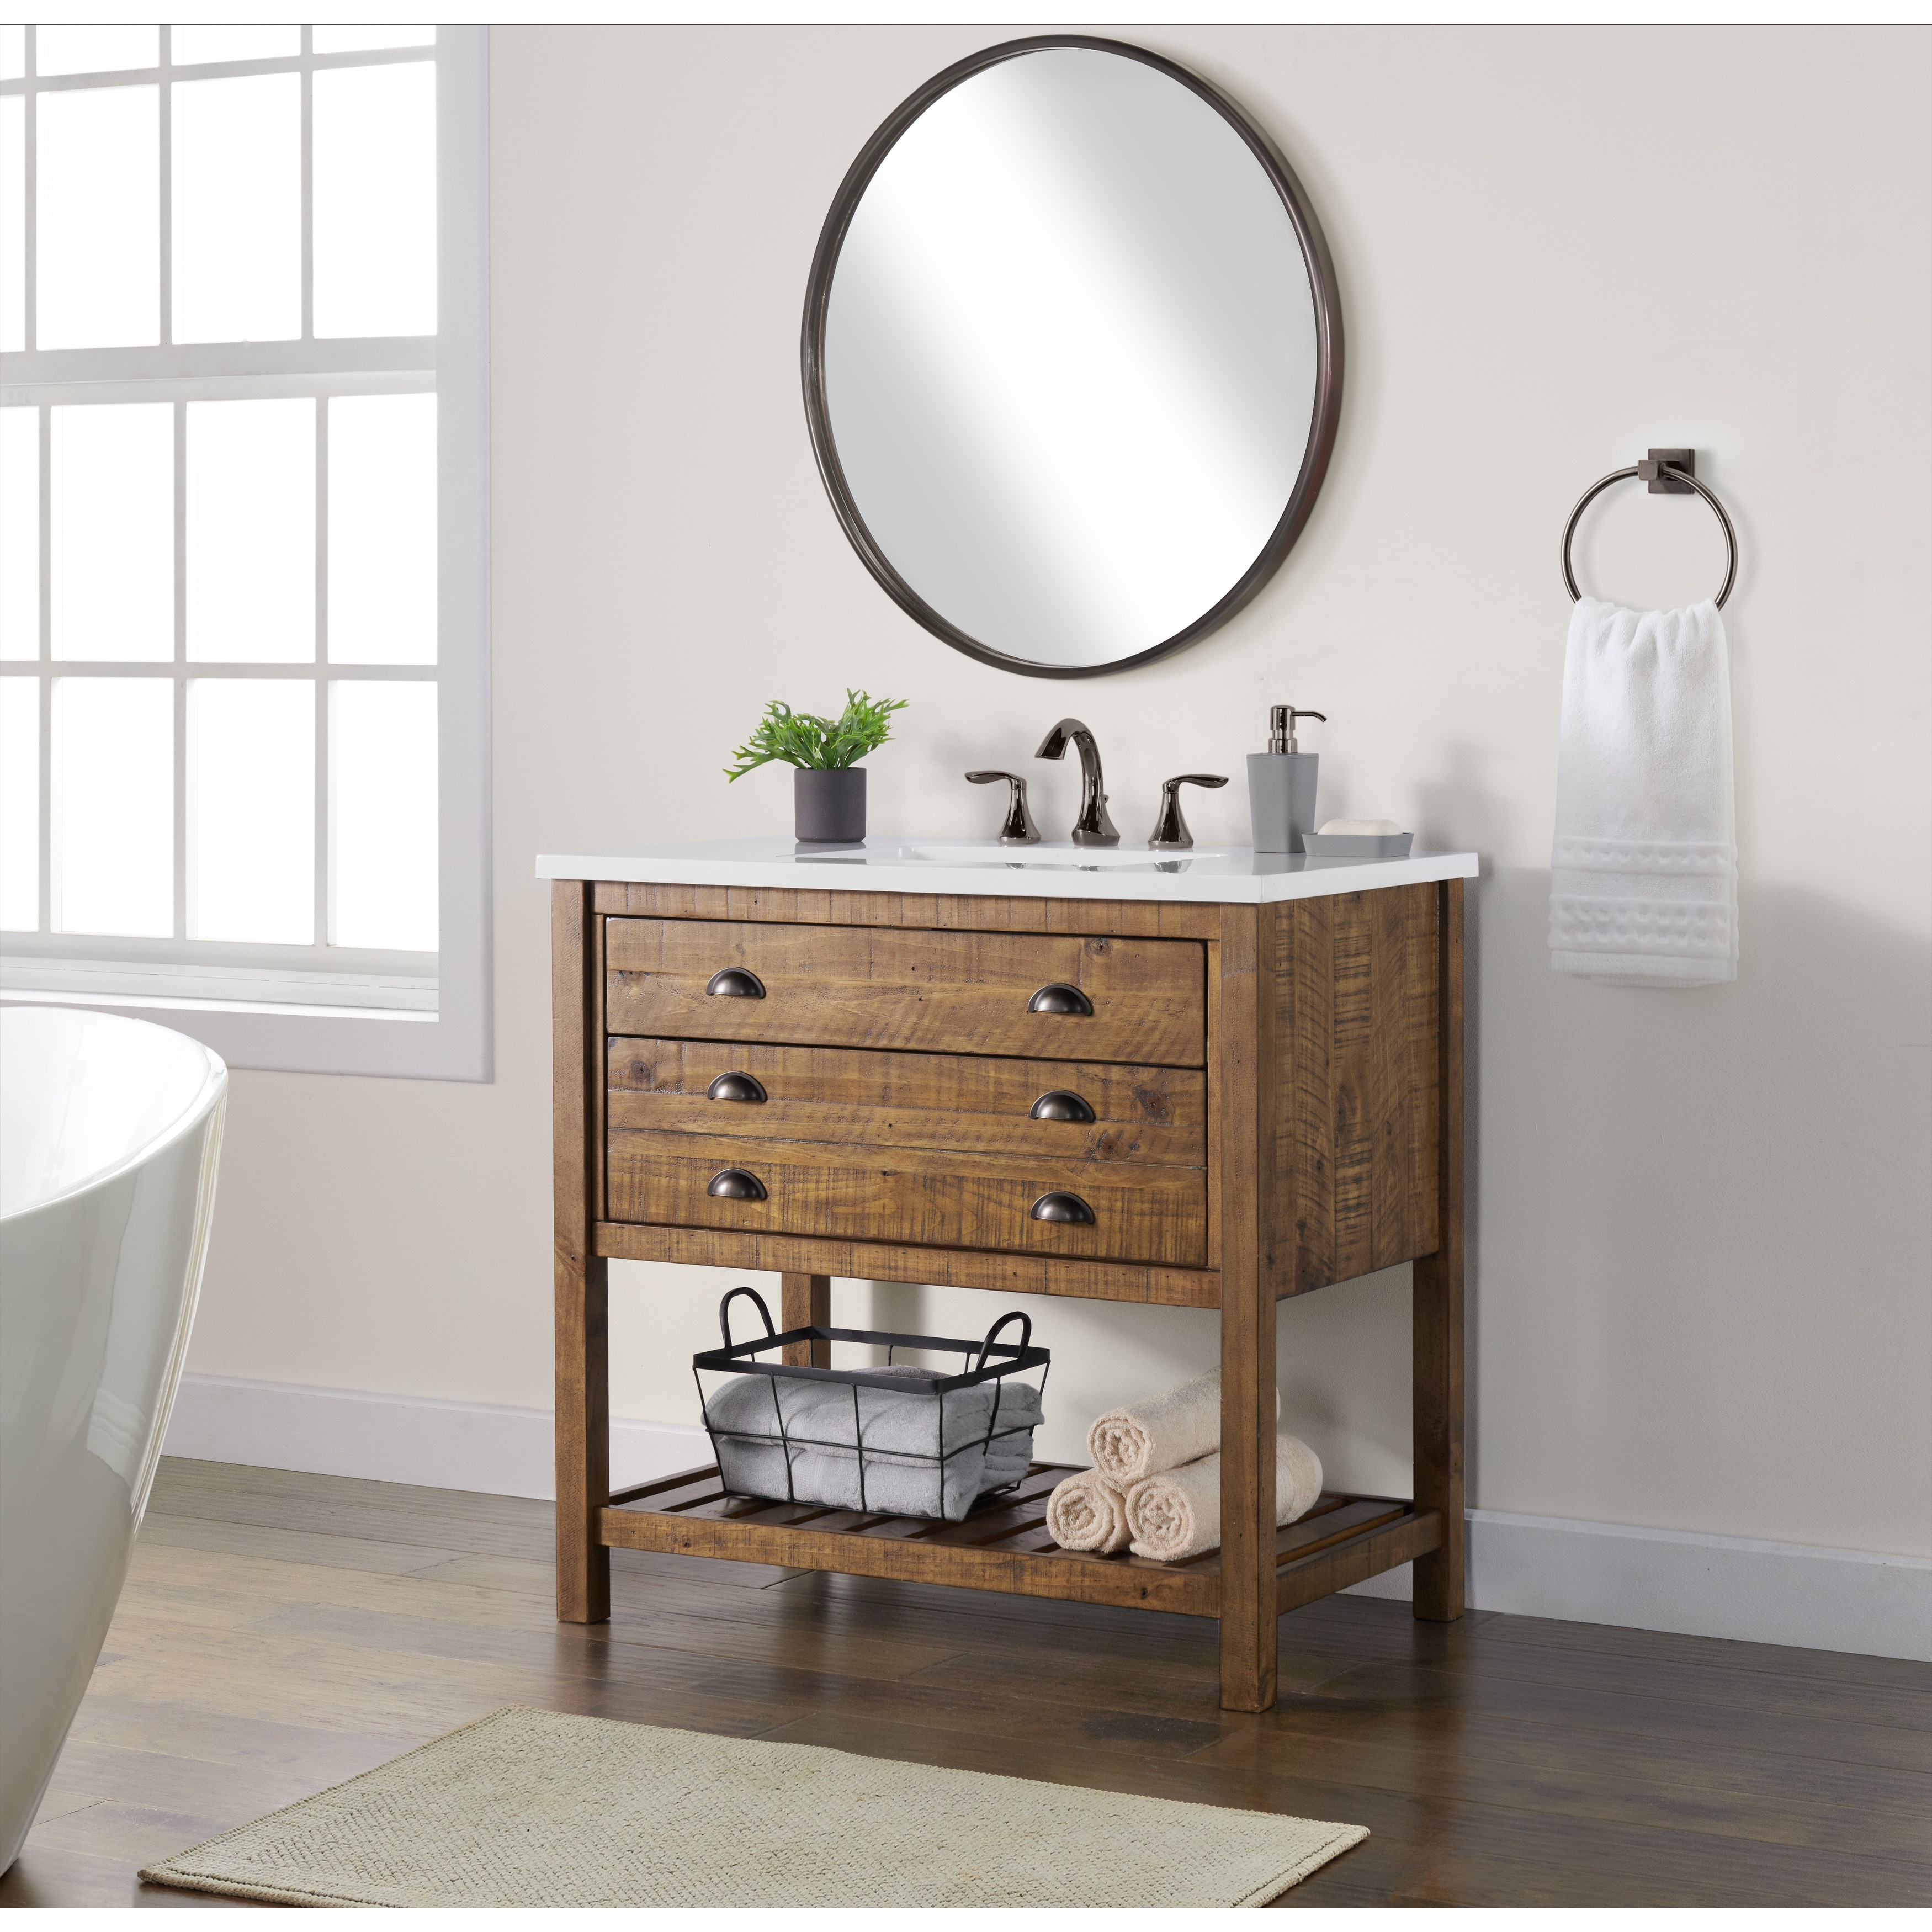 https://ak1.ostkcdn.com/images/products/is/images/direct/d28670b5cdbe3ef38de740255da746569d795114/Monterey-37%22-Bathroom-Vanity-with-Top%2C-Natural-Brown-by-Martin-Svensson-Home.jpg